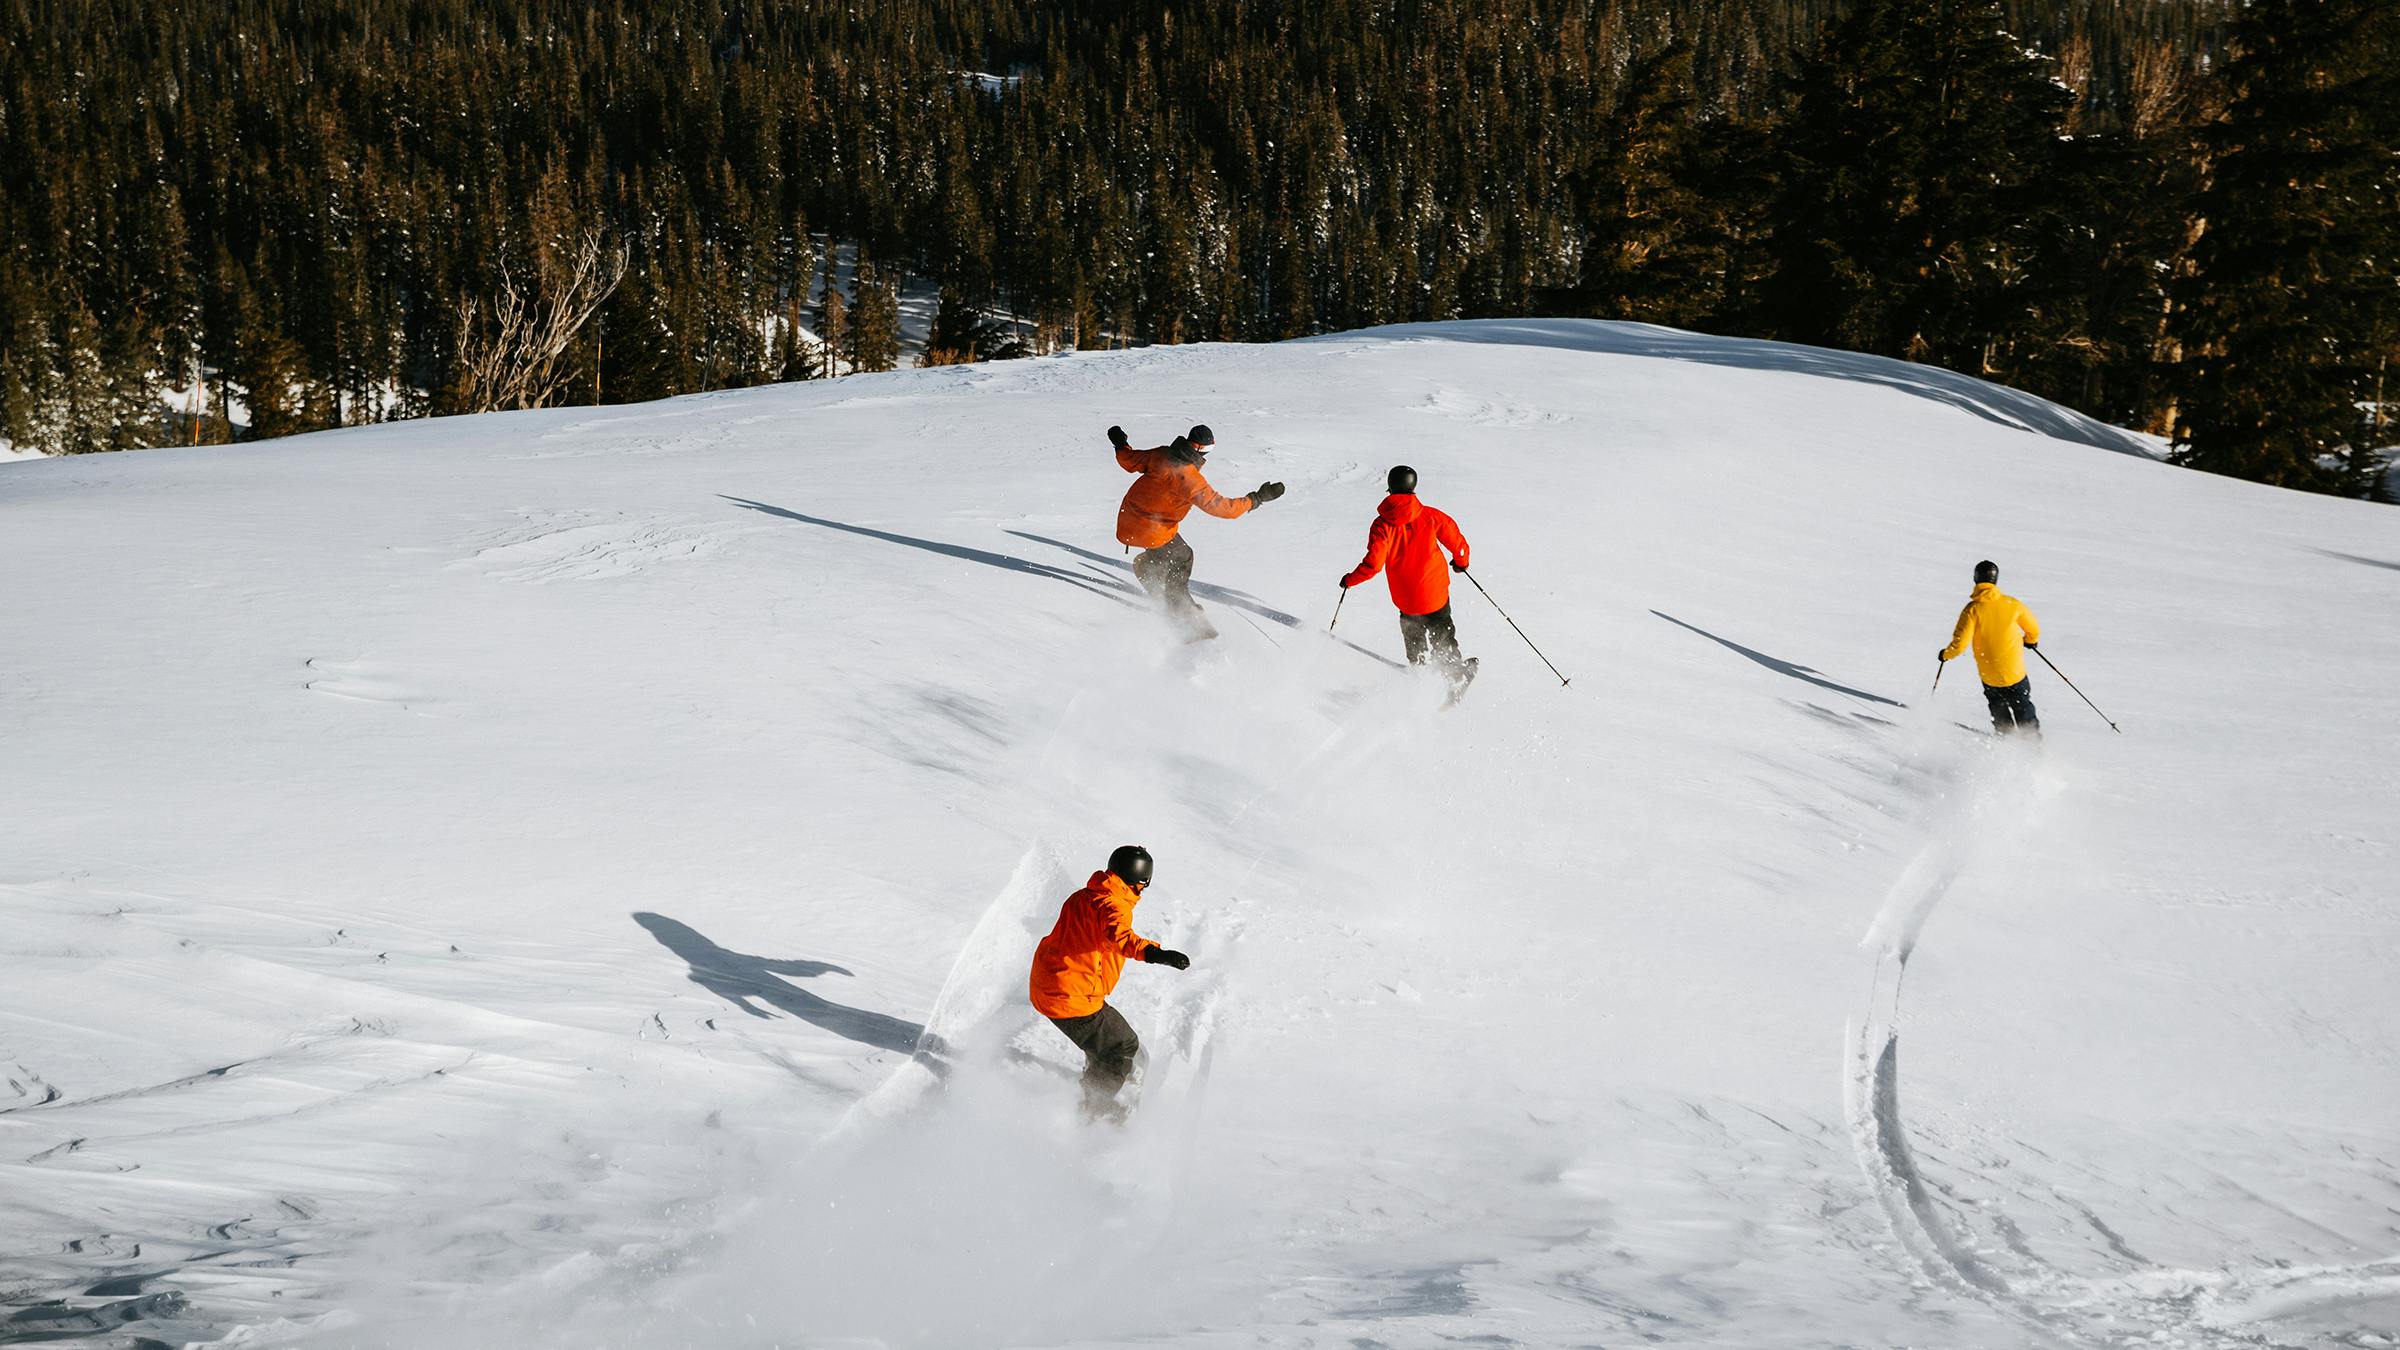 Group of 4 skiers photographed from behind